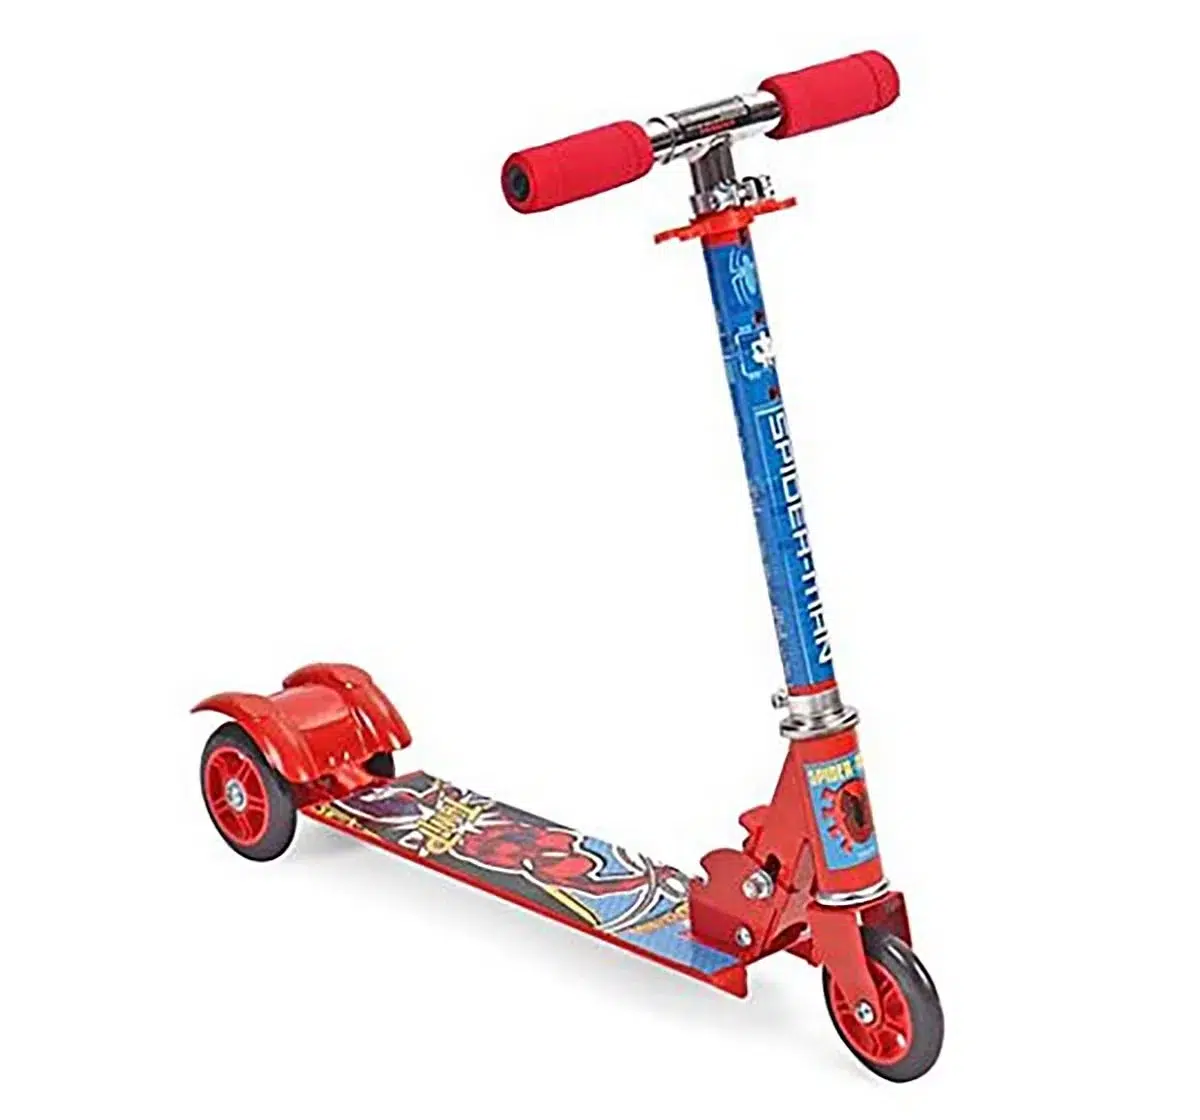 Buy UT Kick Scooter, Adjustable Height and Rear Brake